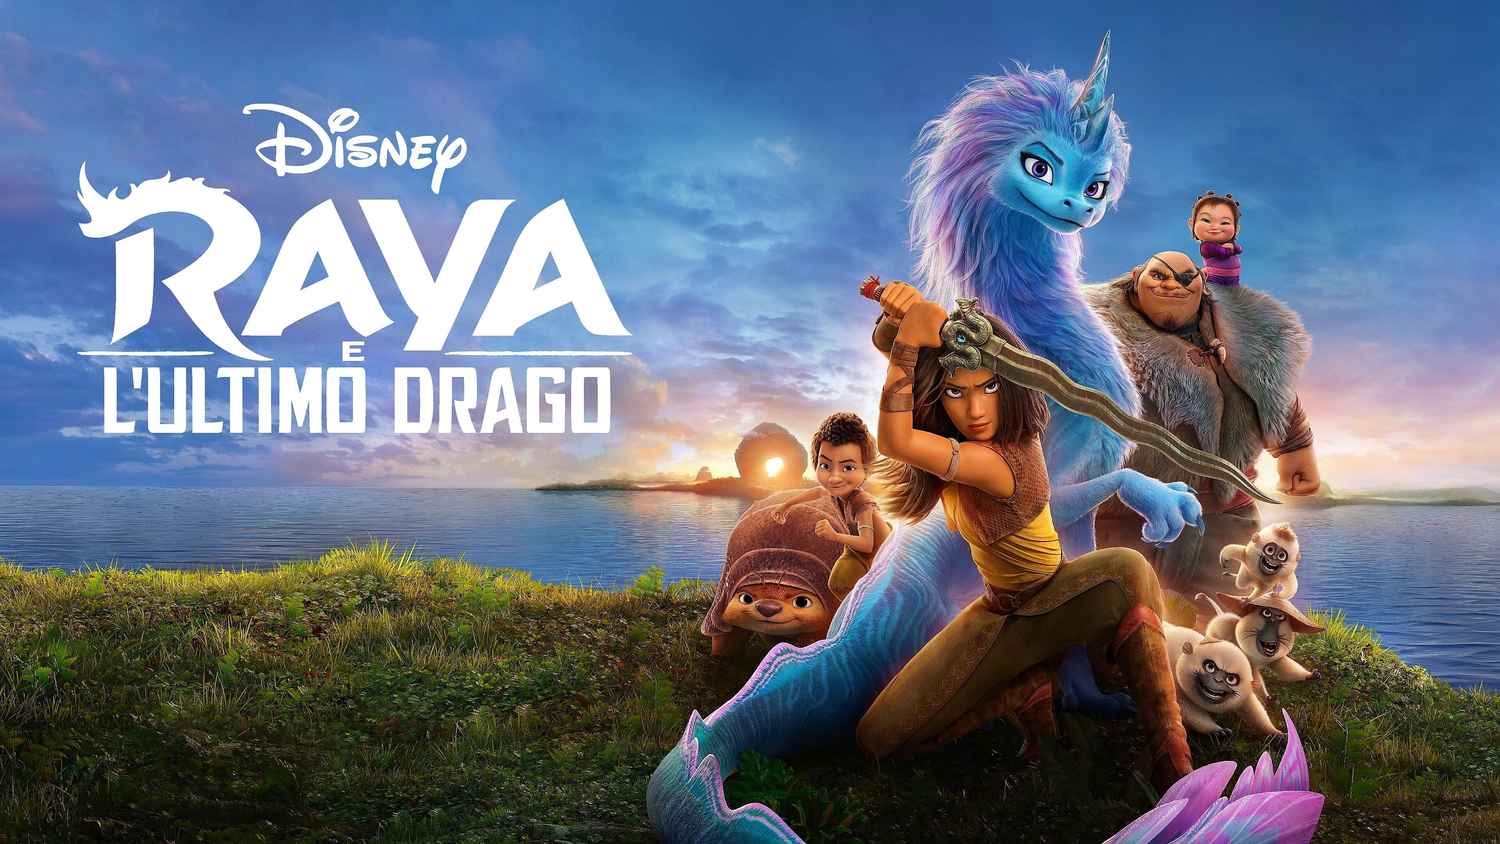 Raya and the last dragon full movie watch online